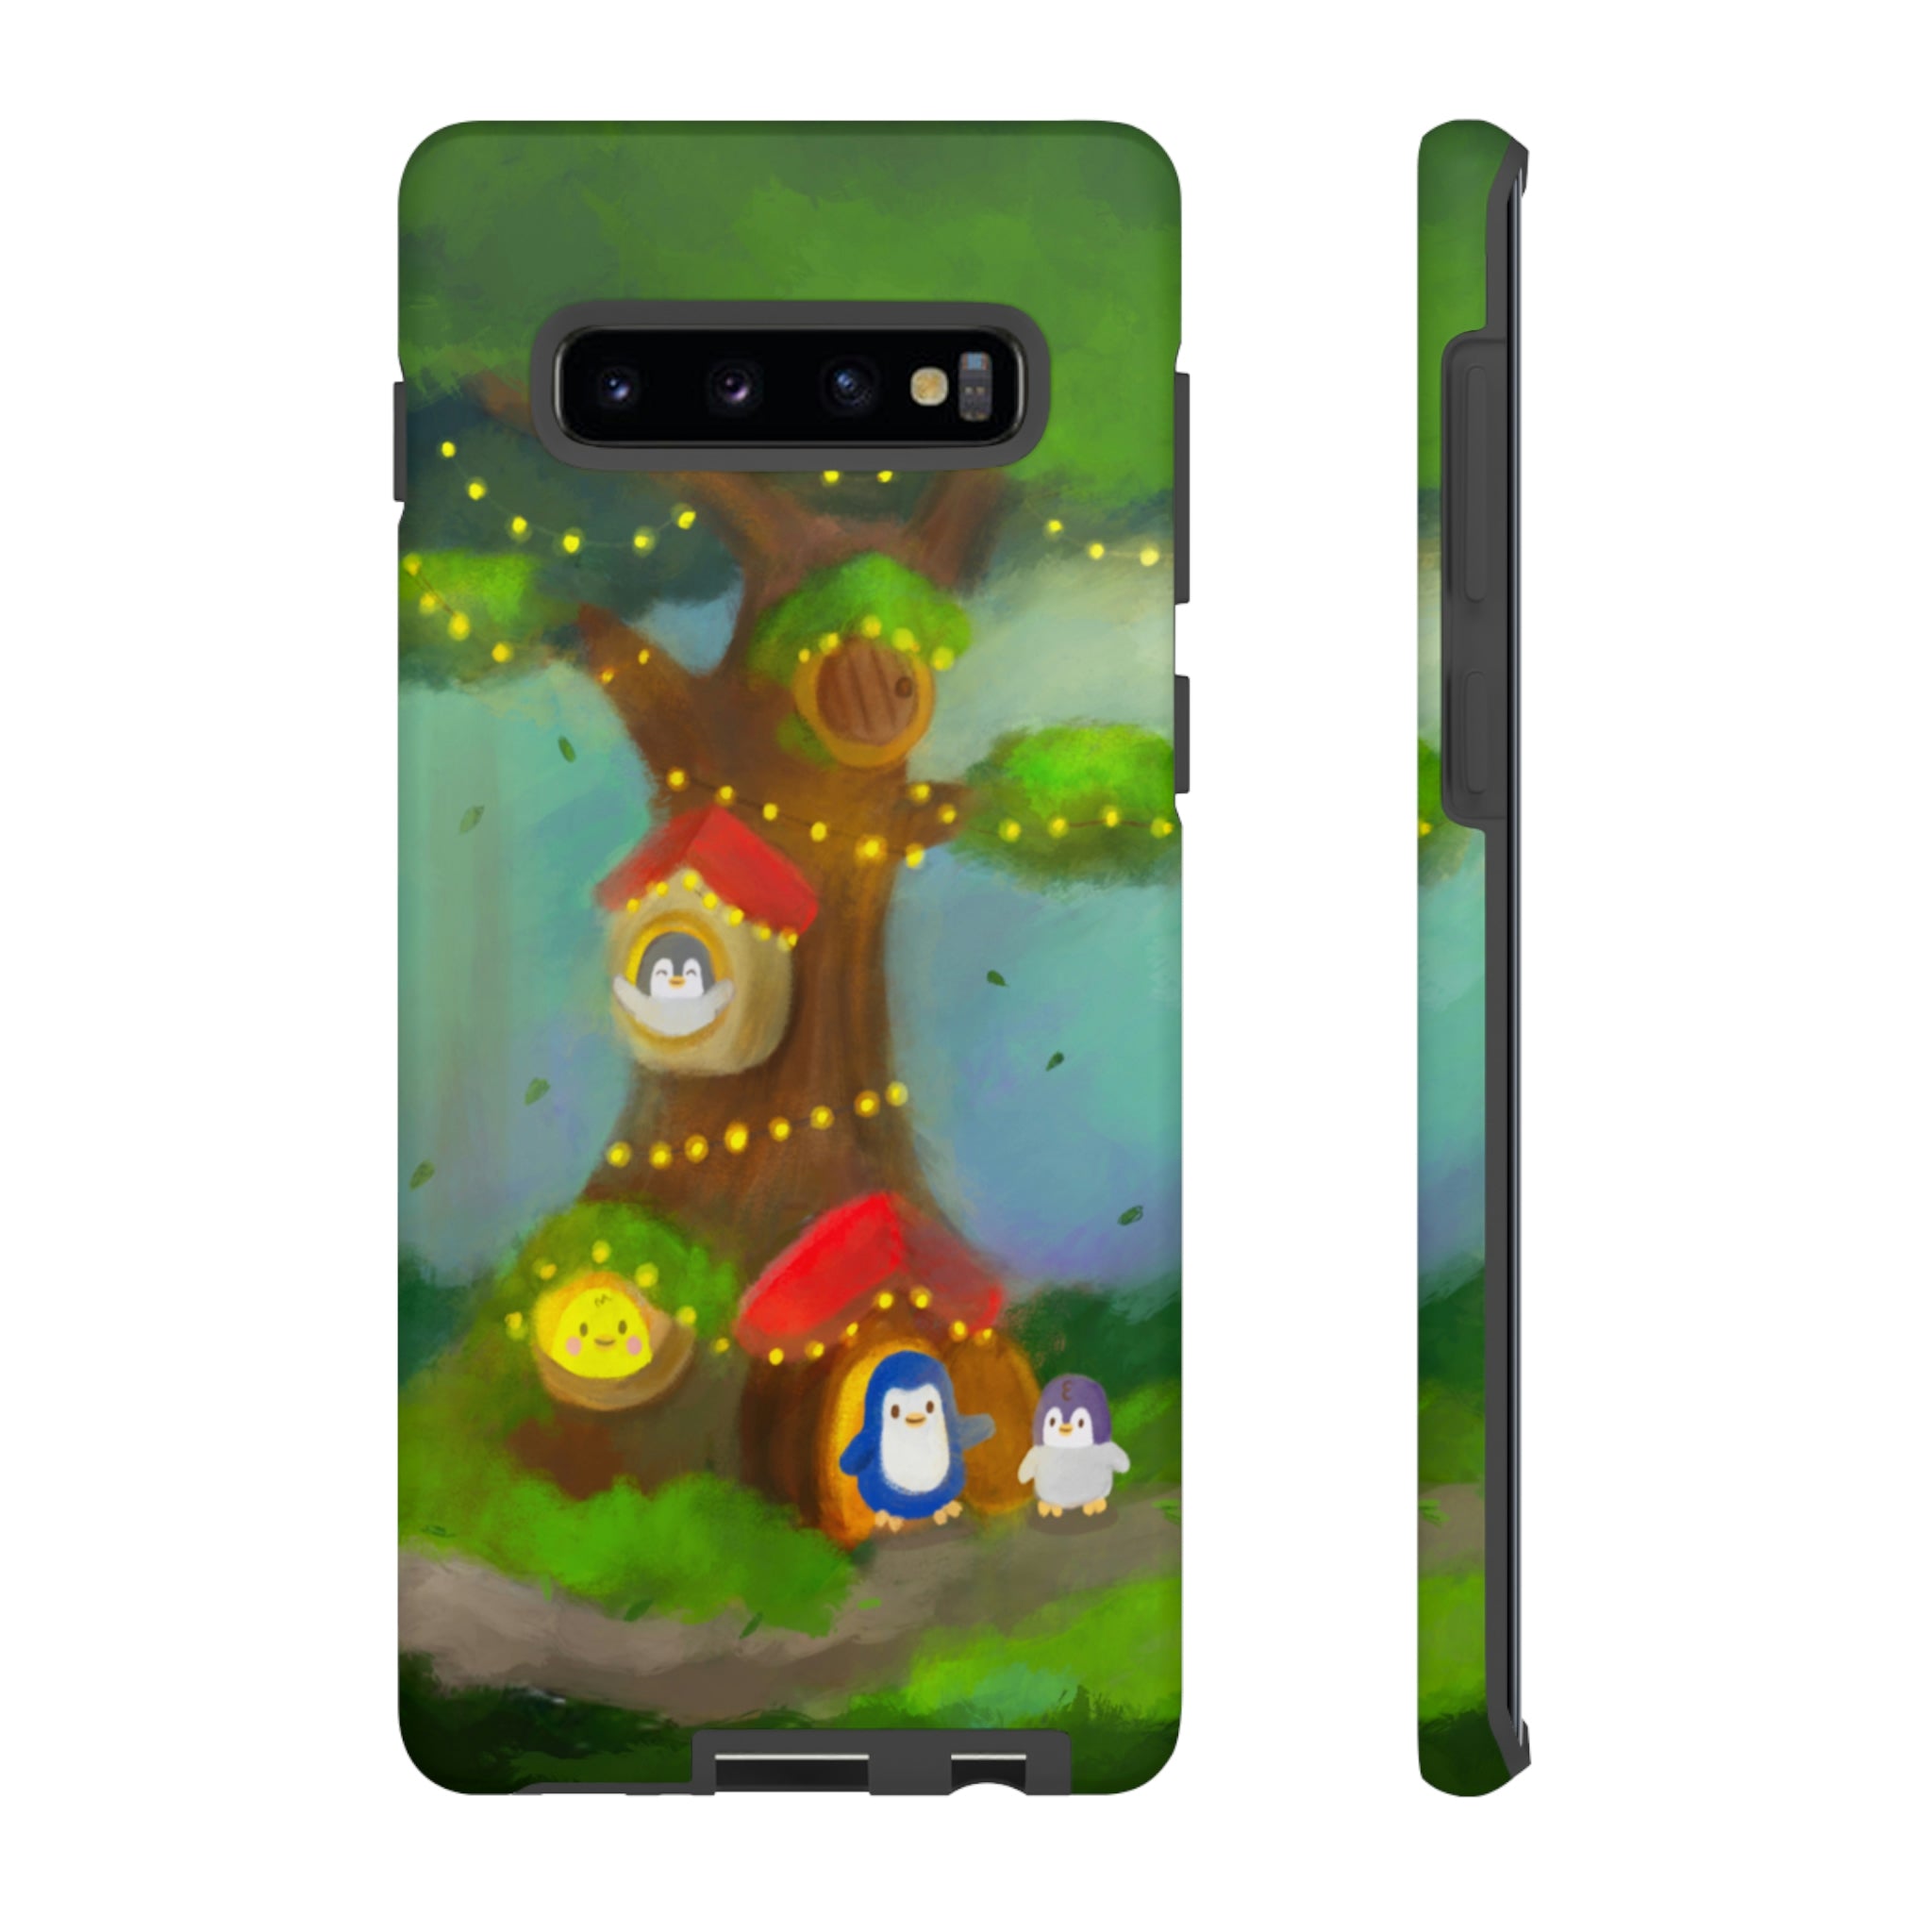 Our Home in the Forest Samsung/Google Phone Case